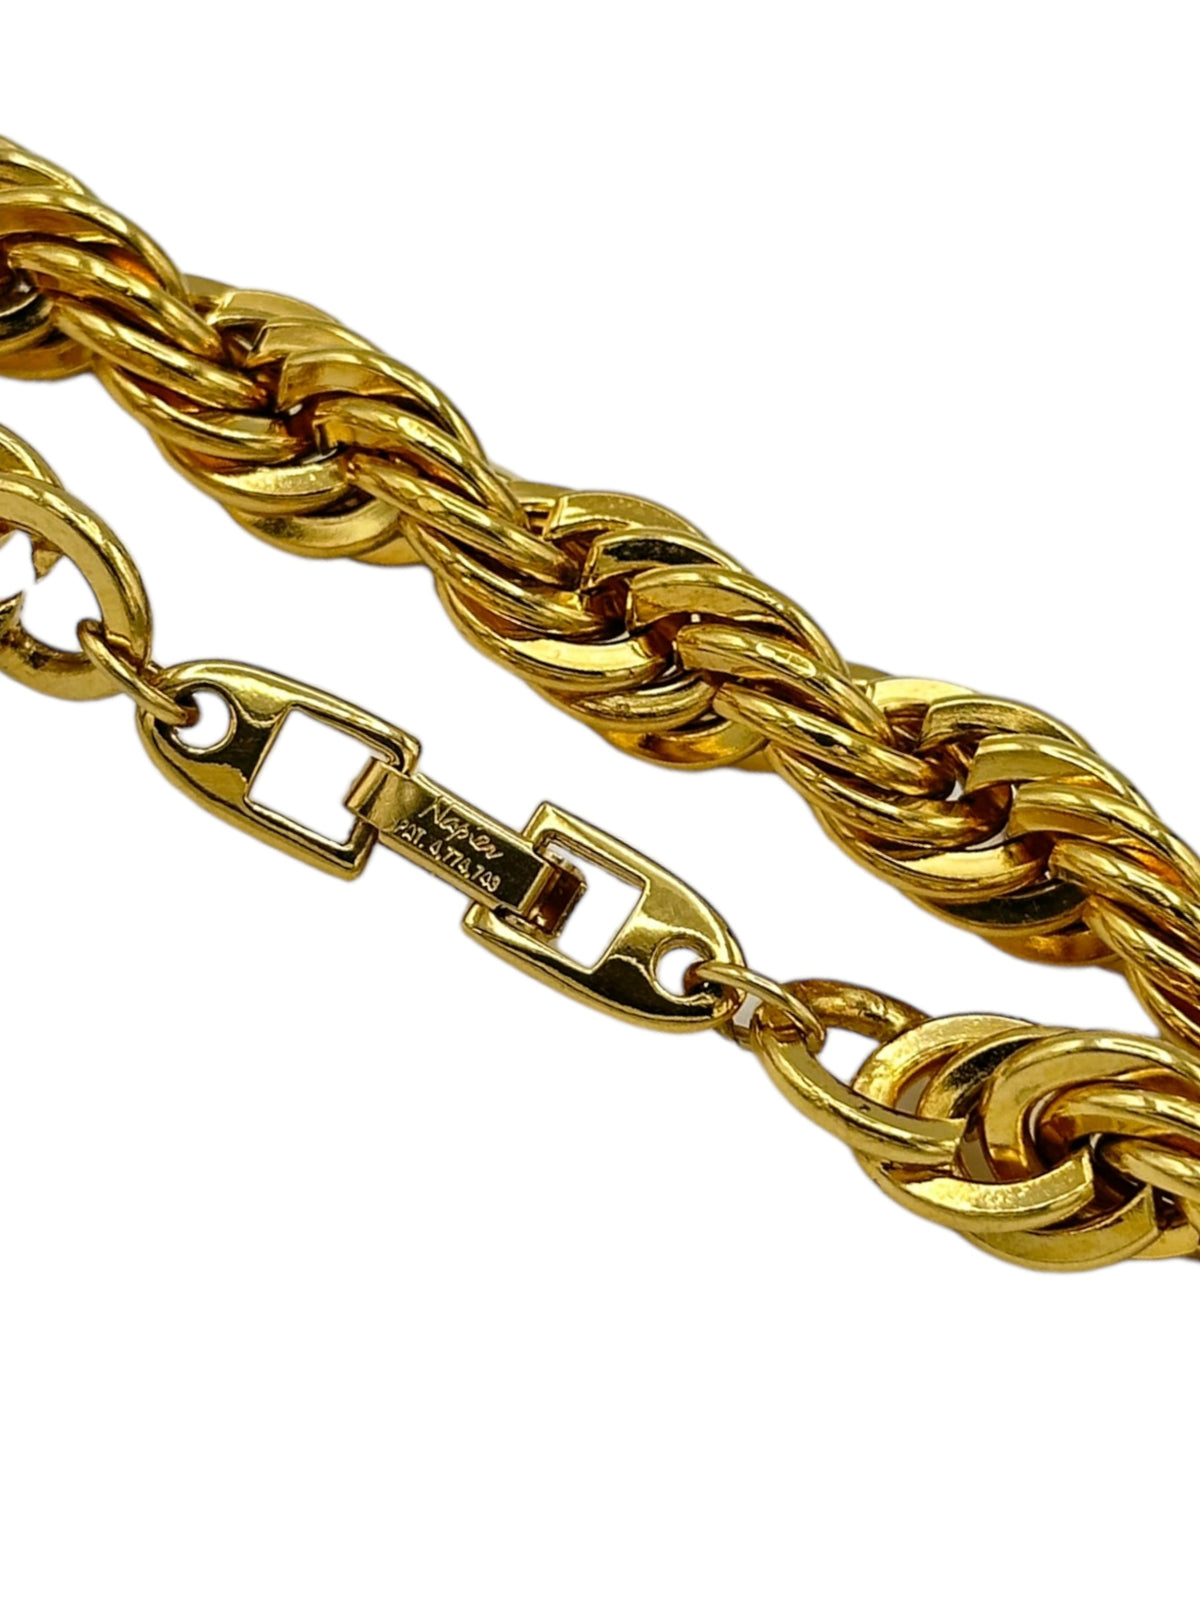 Napier Vintage Jewelry Rope Link Gold Long Chain Necklace